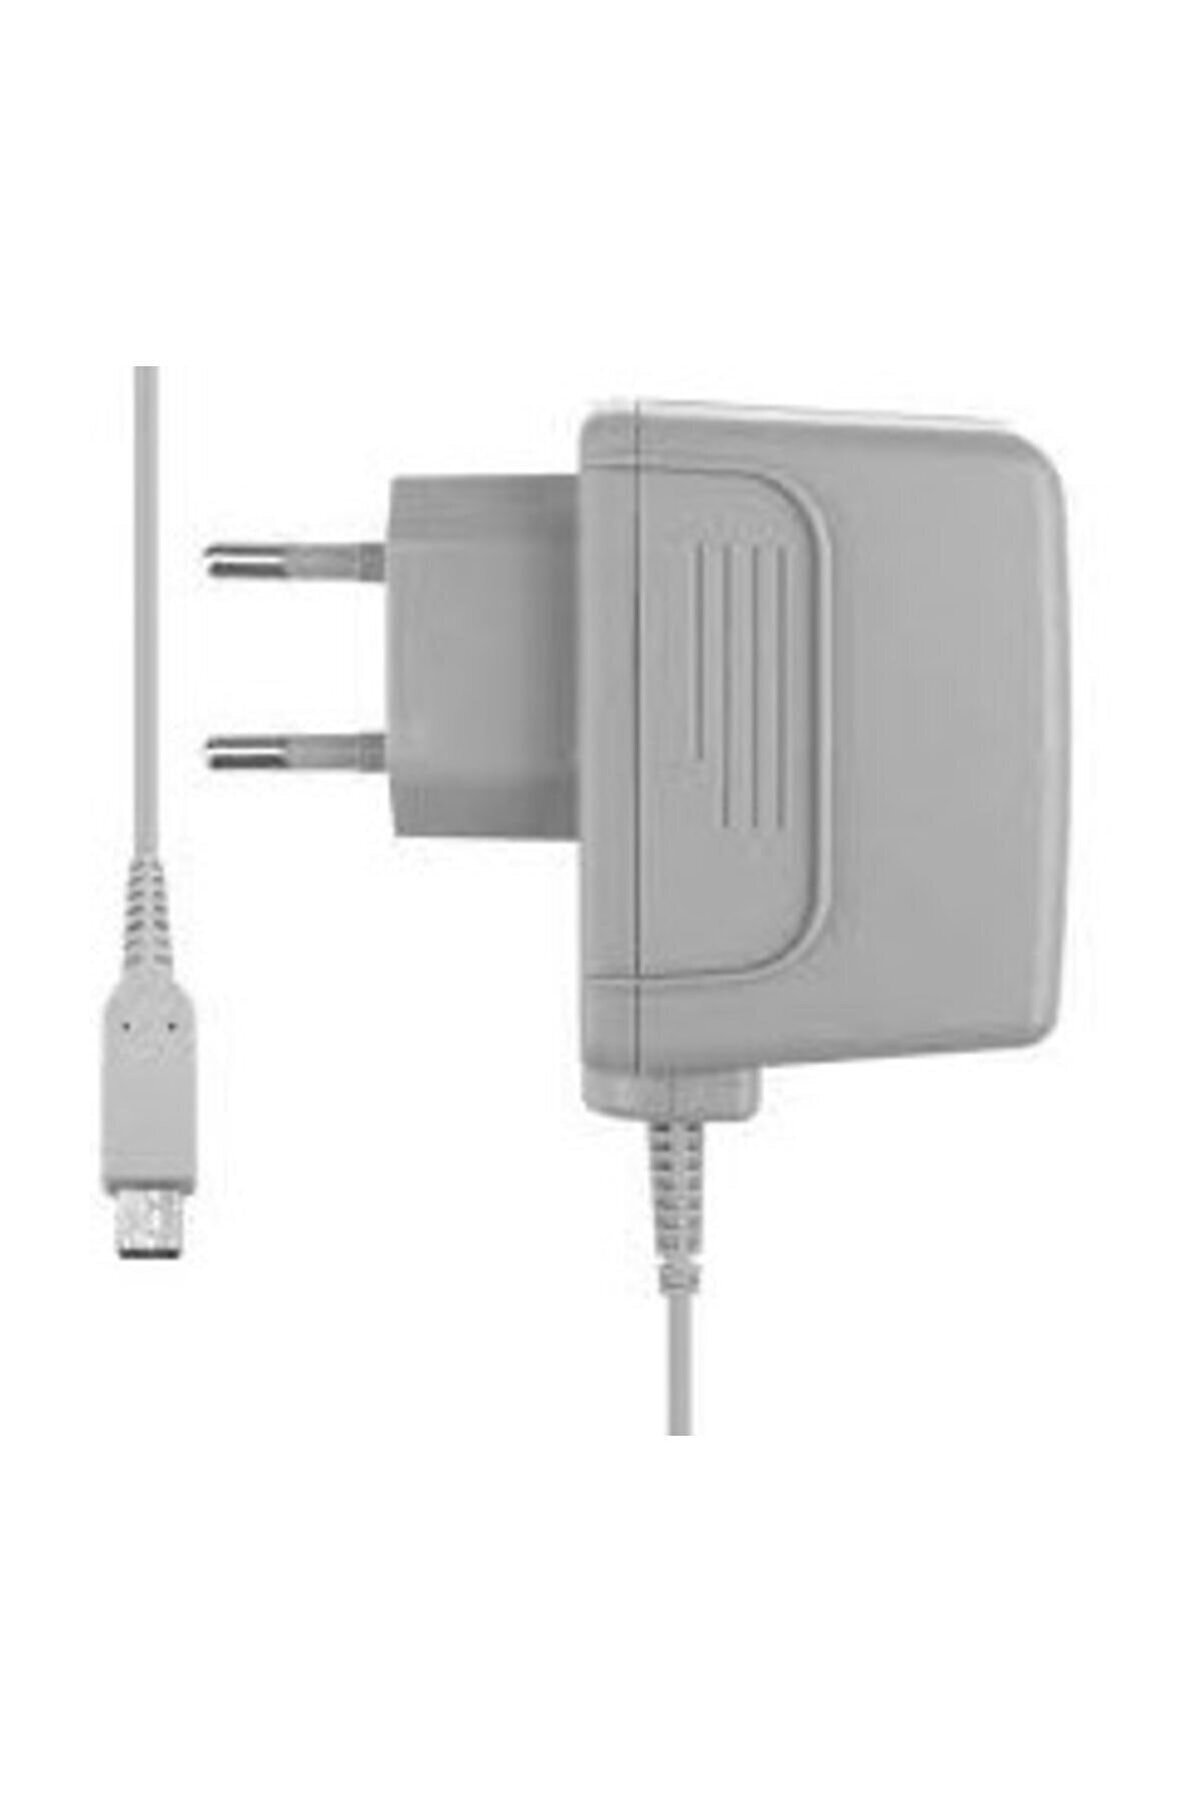 Nintendo For New 3ds ll 3ds AC ADAPTER 6922011920228 Mood Oyun